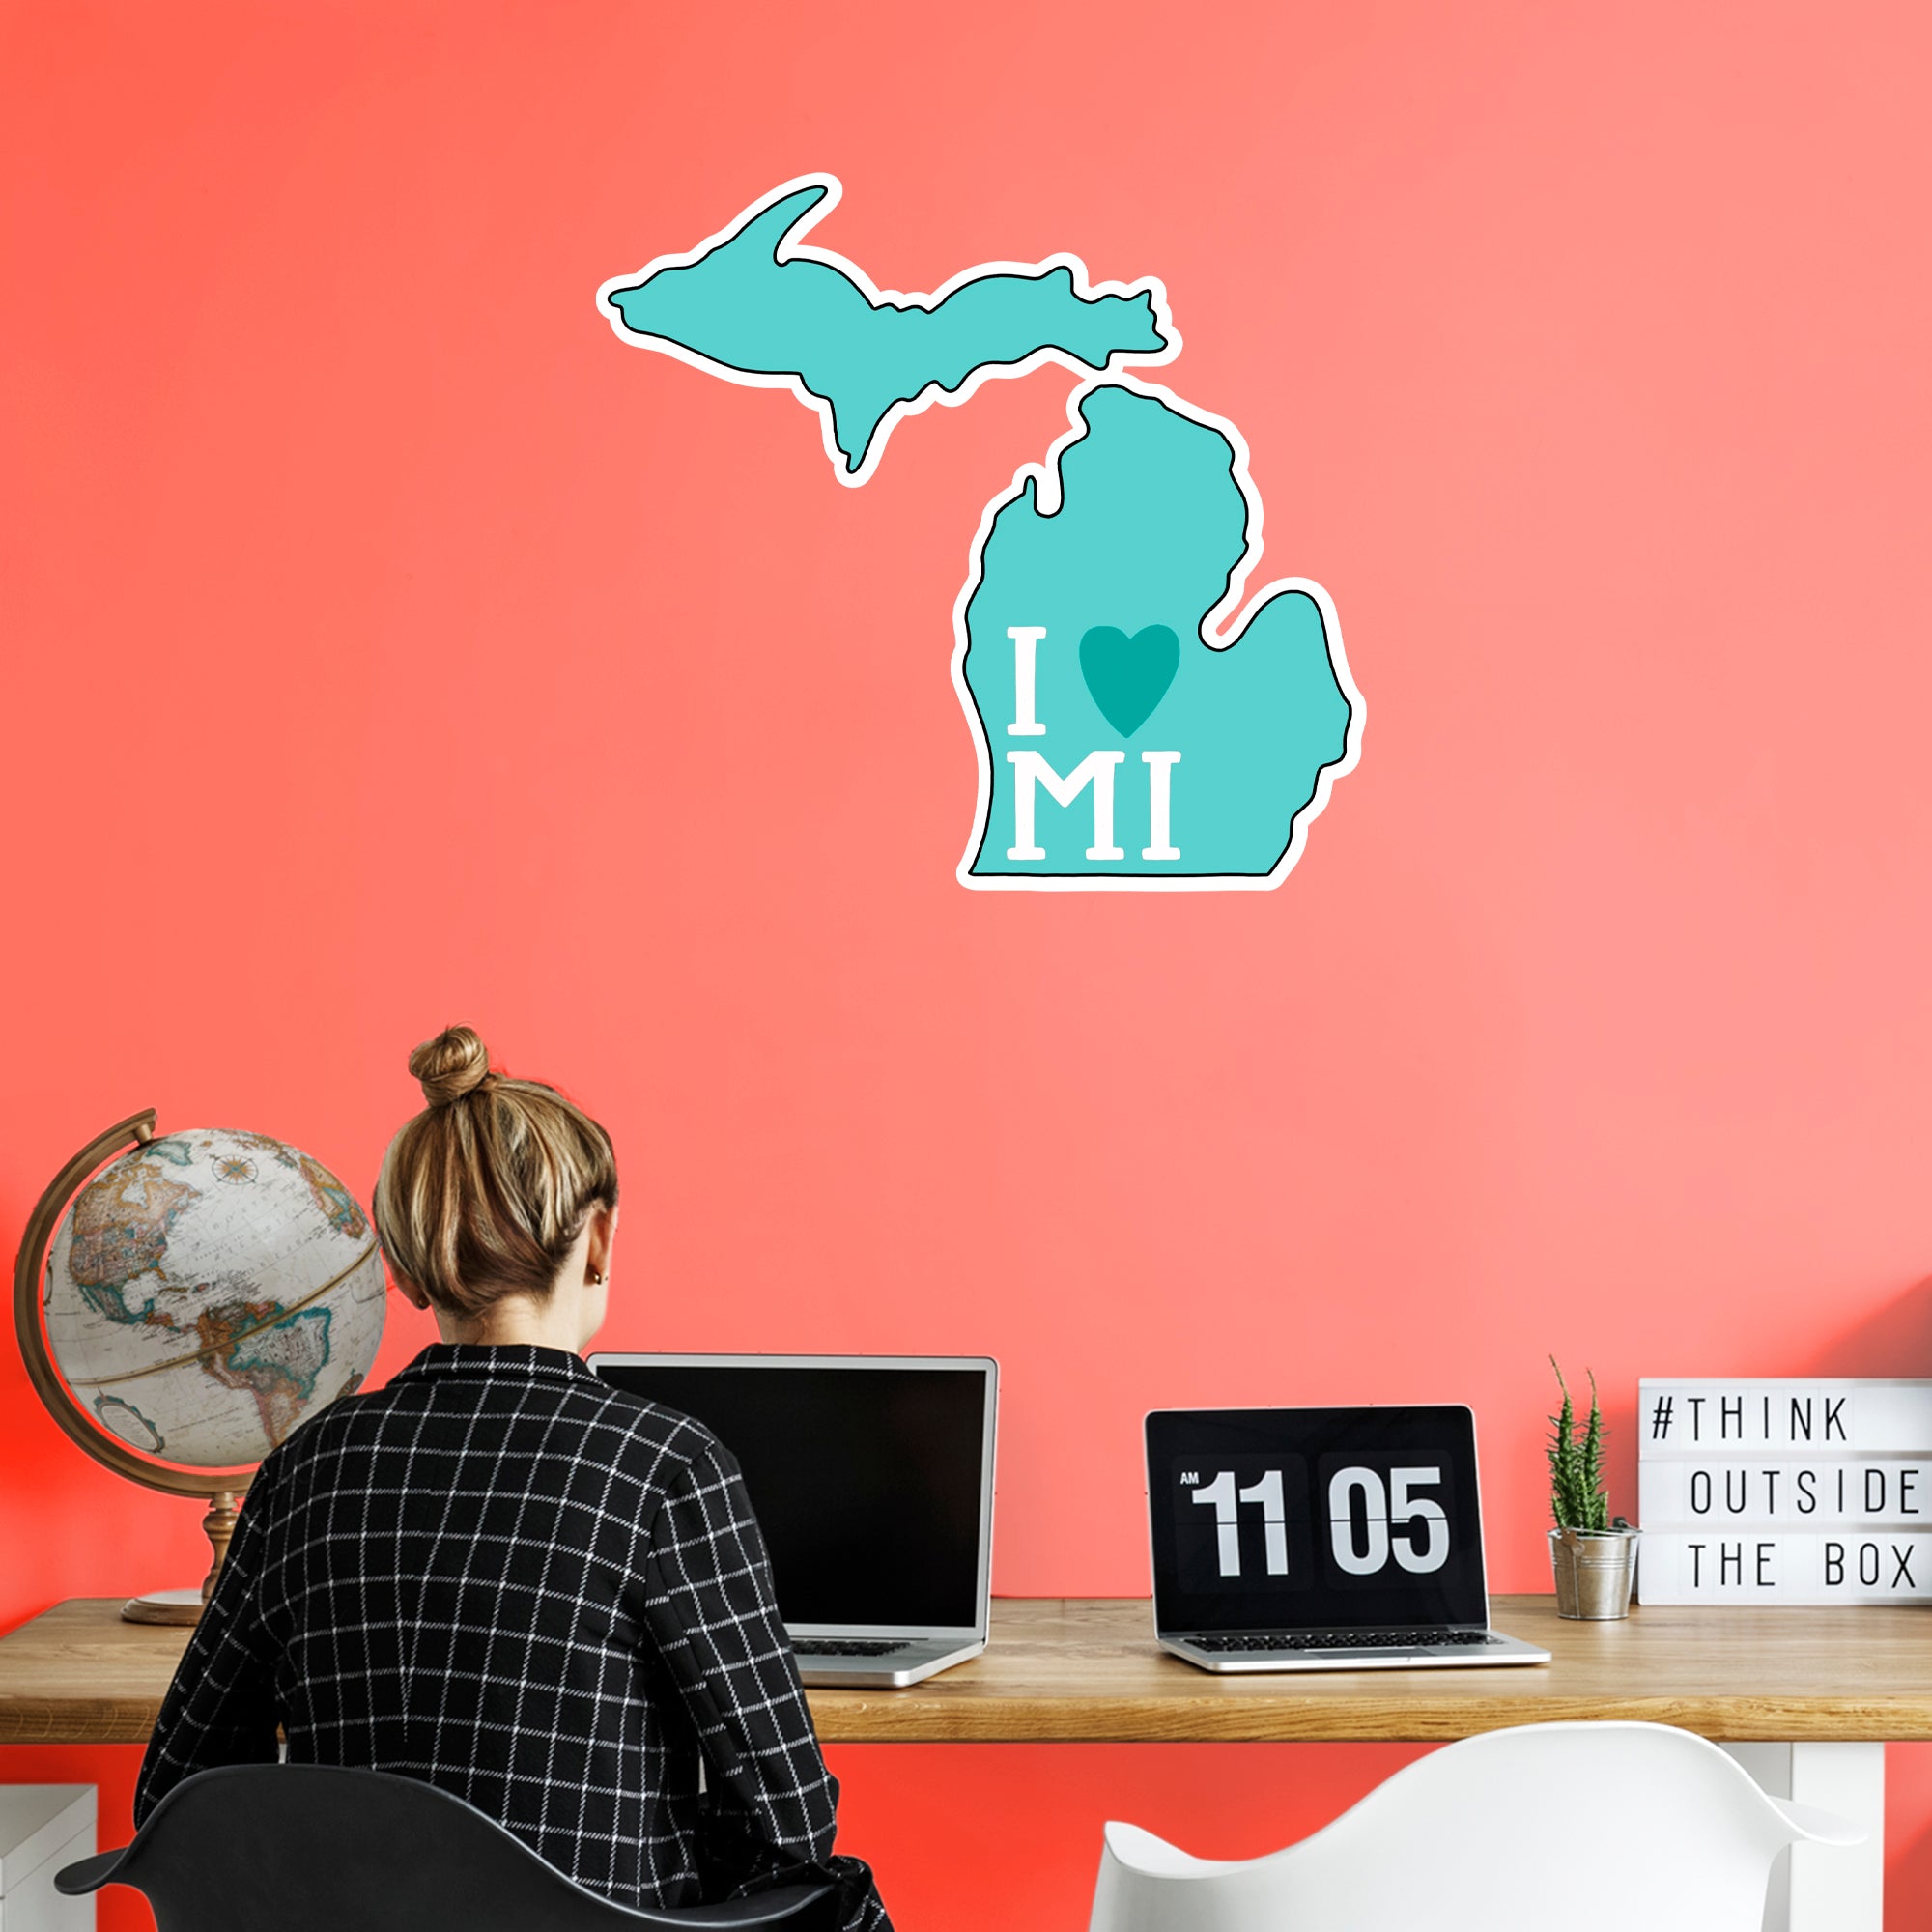 I Love Michigan - Officially Licensed Big Moods Removable Wall Decal XL by Fathead | Vinyl